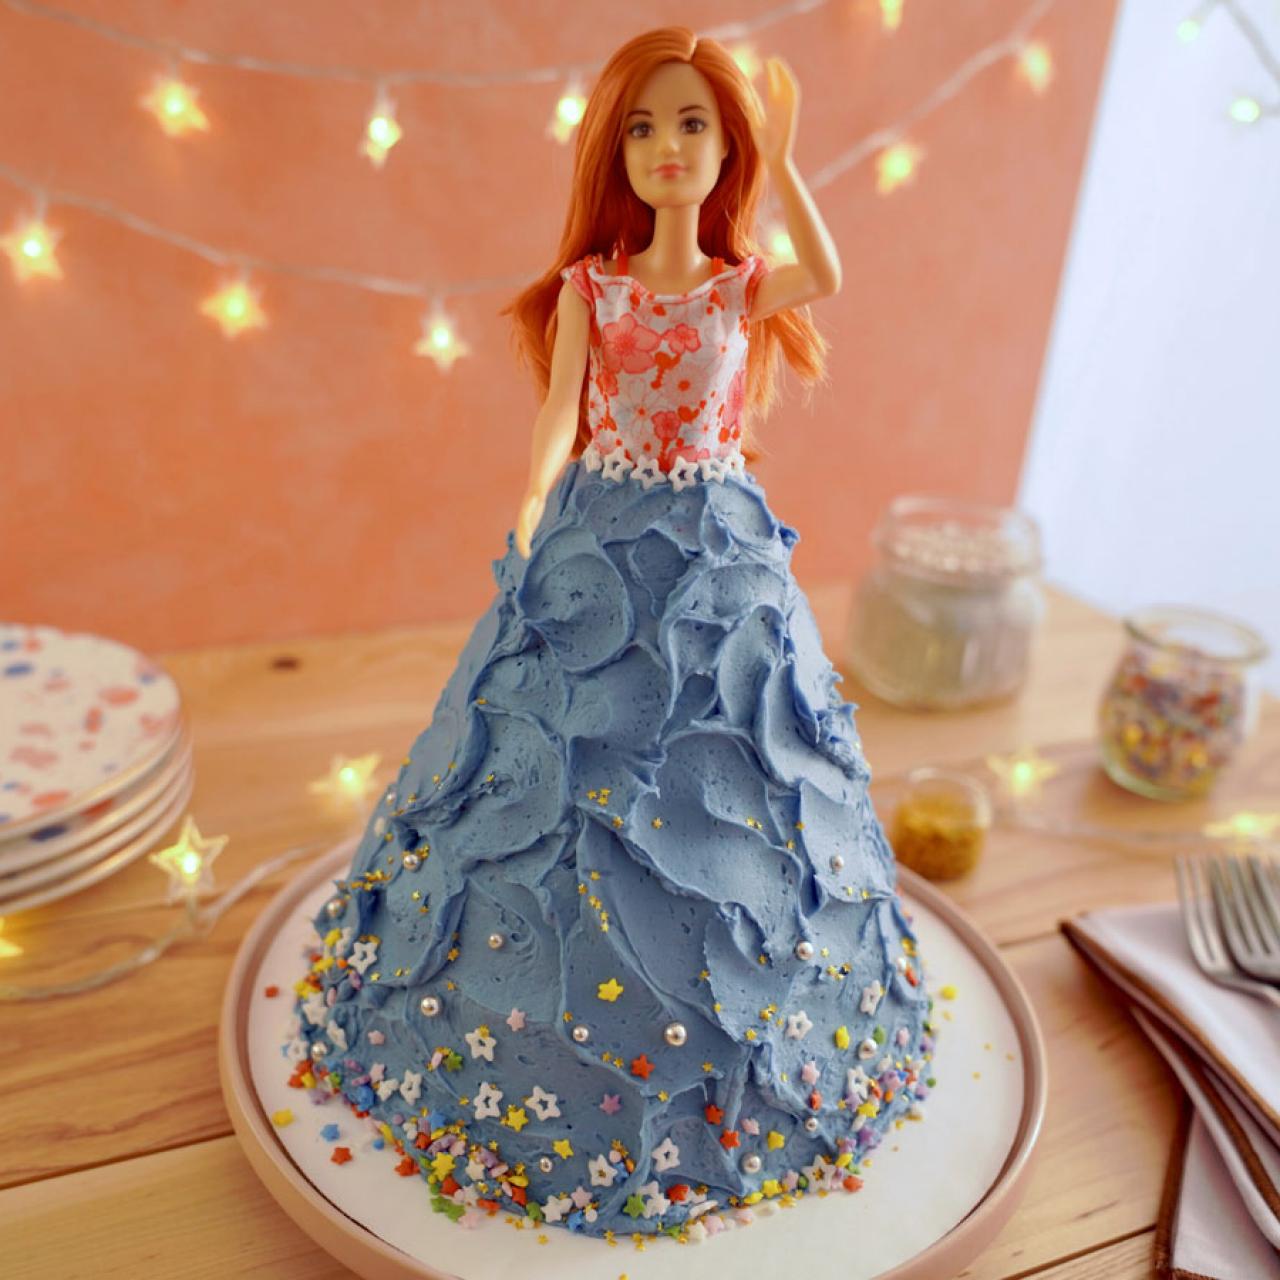 Where to find the perfect doll cake for birthday - Cakes and Bakes Stories